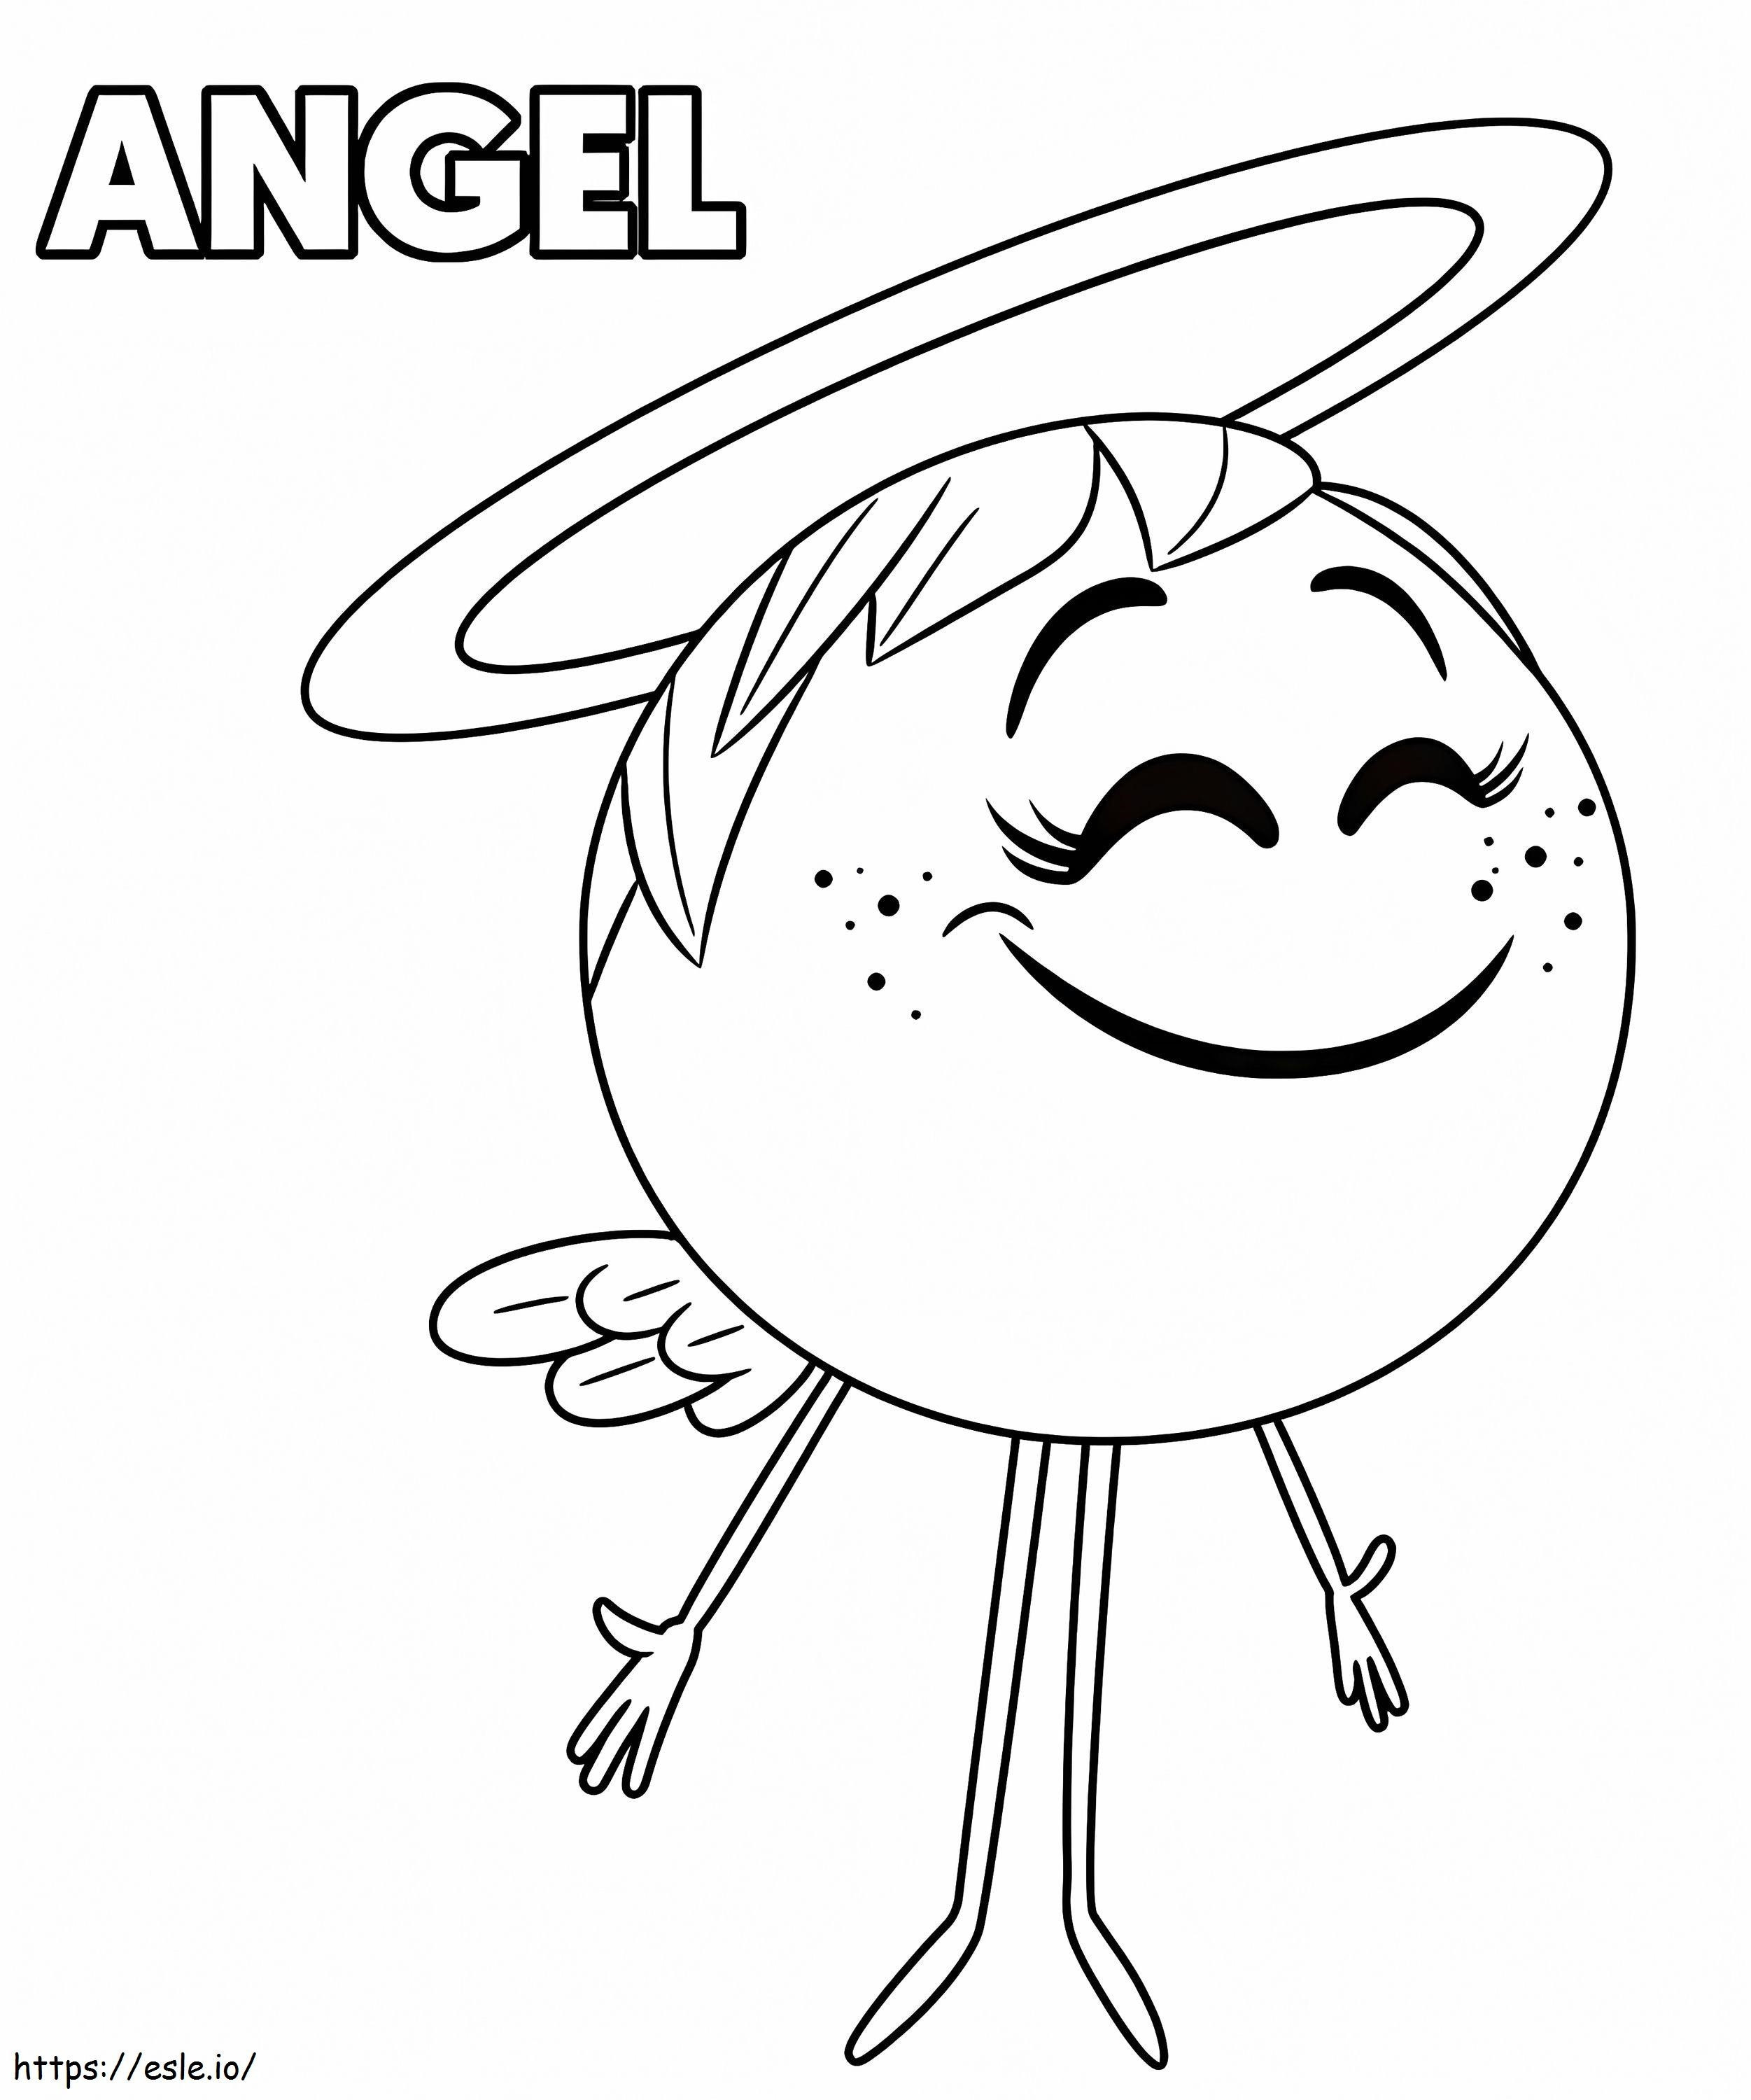 Angel From The Emoji Movie coloring page